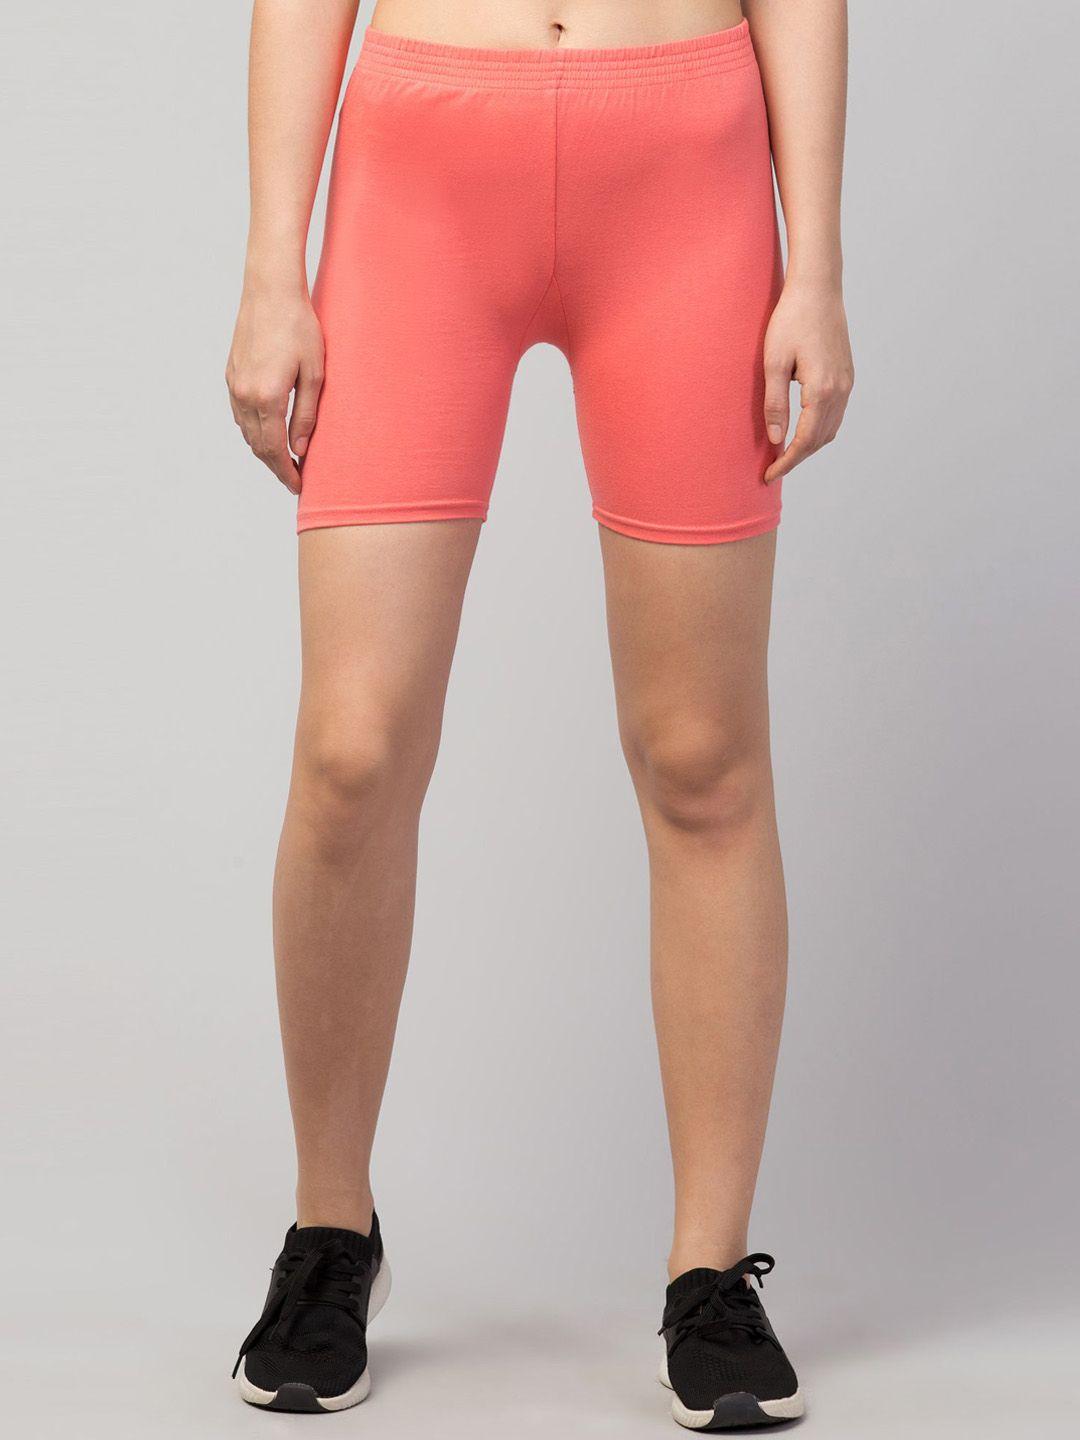 apraa-&-parma-women-coral-slim-fit-cycling-sports-shorts